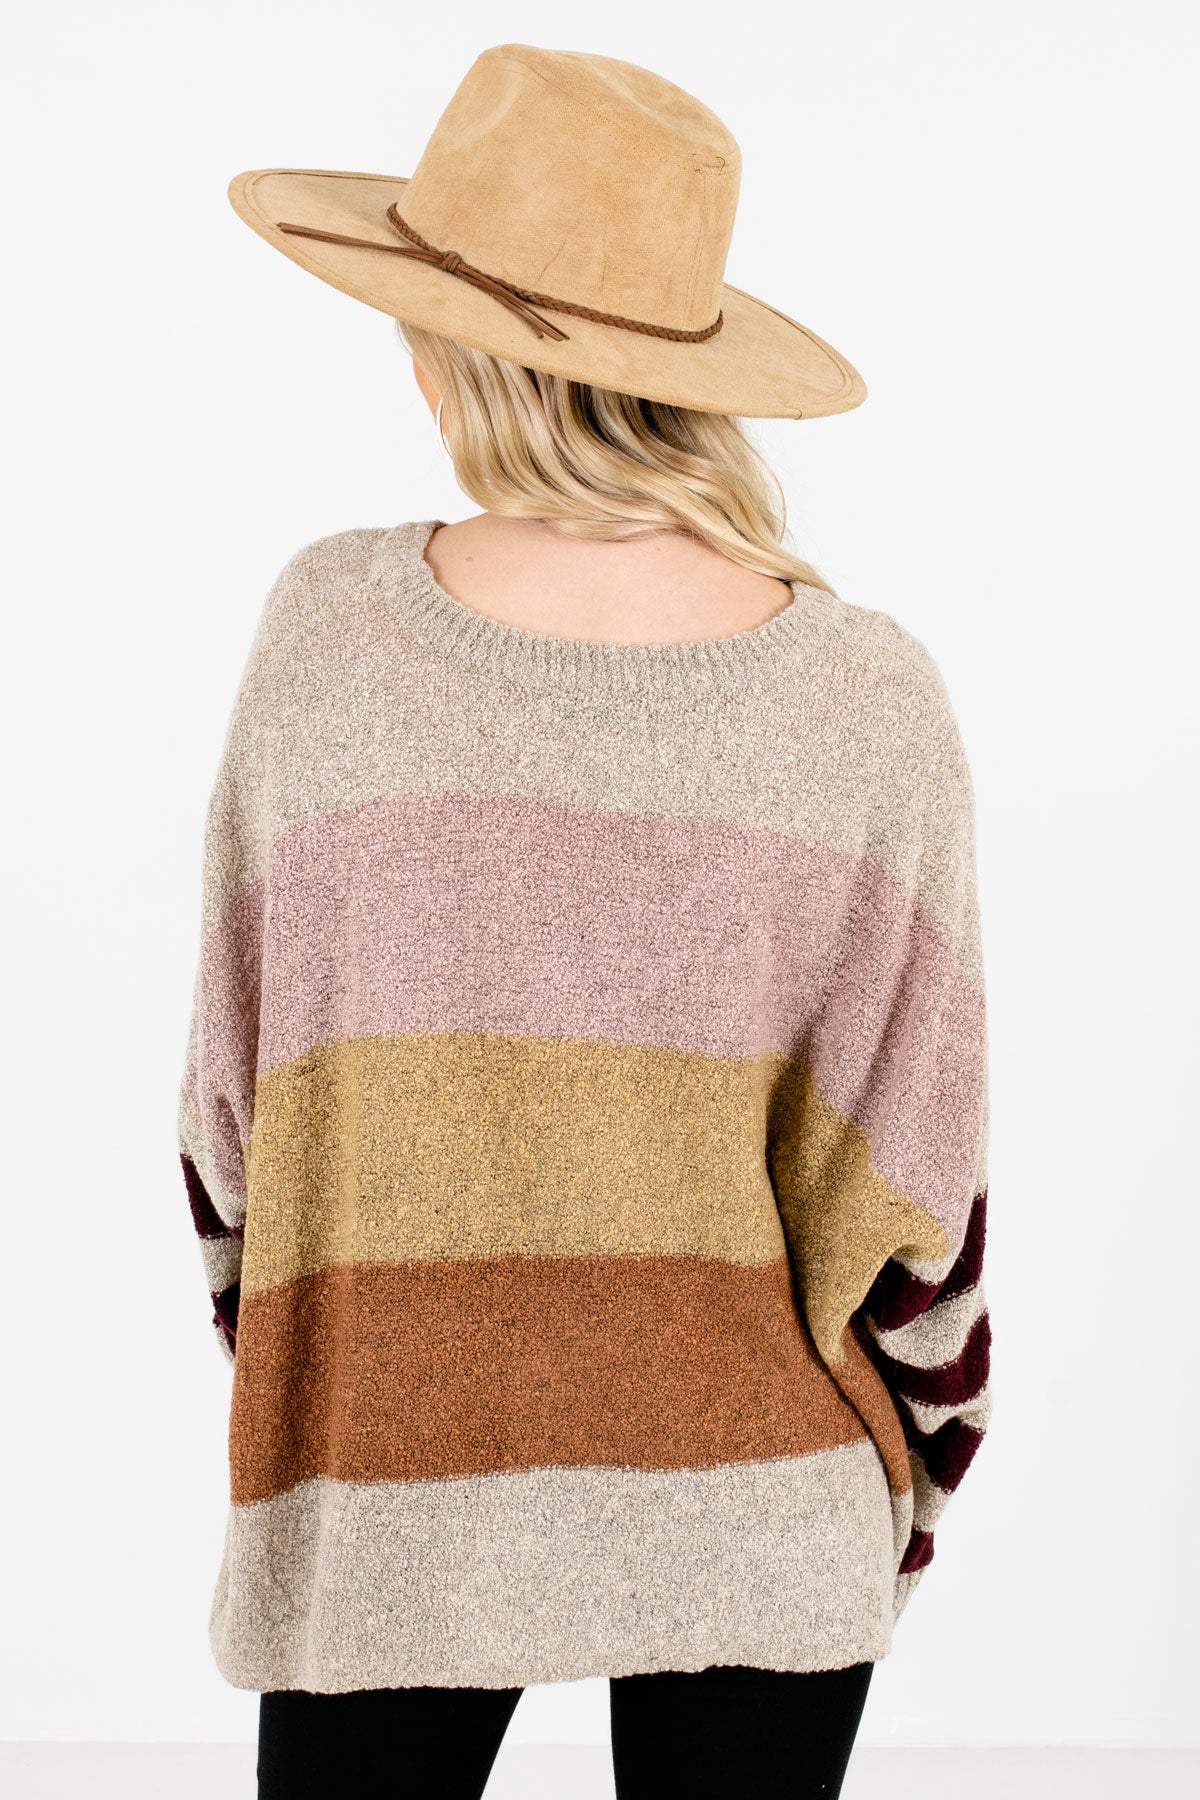 Women's Beige High-Quality Knit Material Boutique Sweater